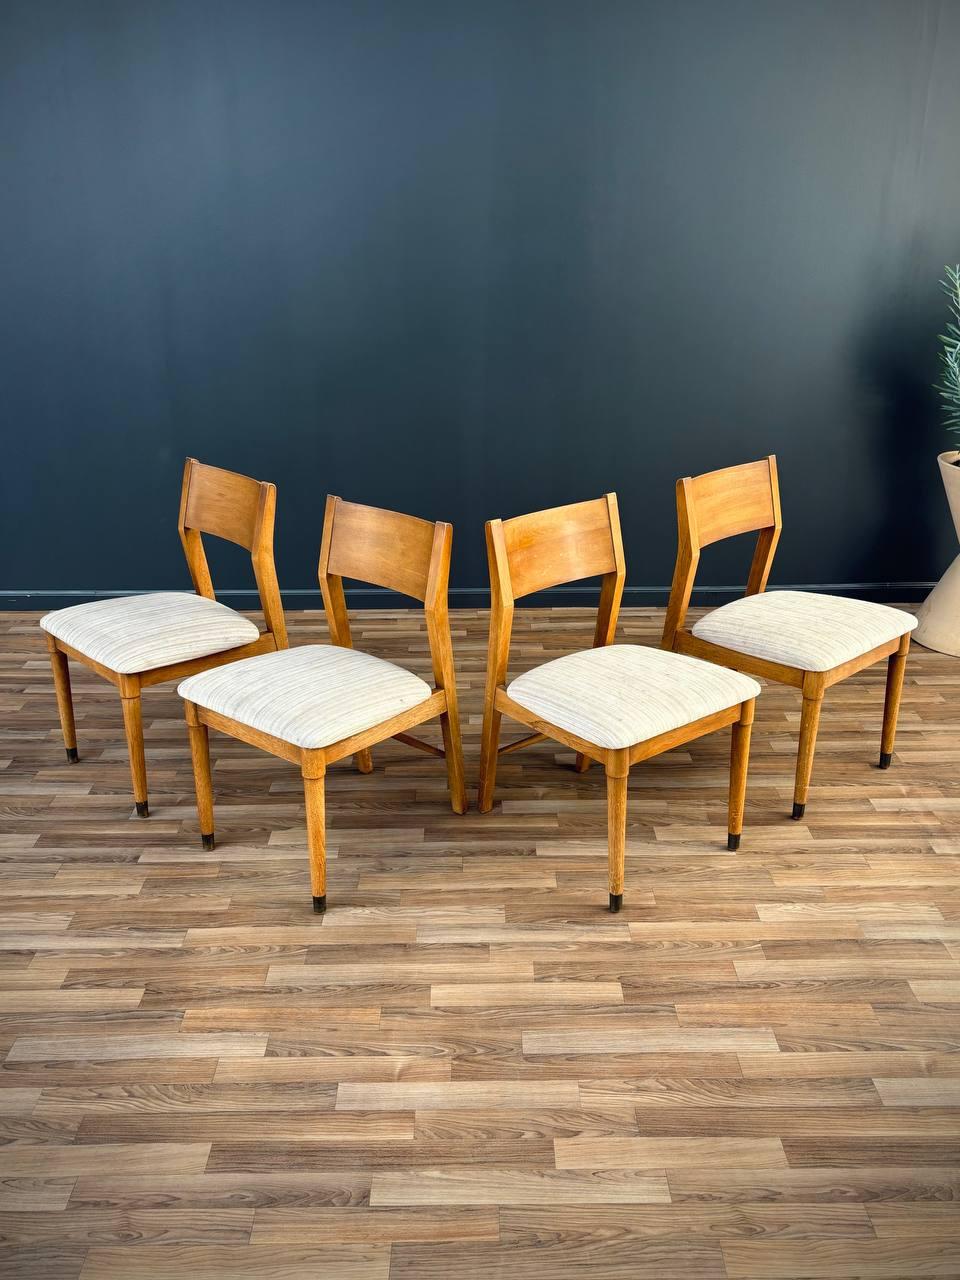 American Set of 6 Mid-Century Modern Oak Dining Chairs by Drexel For Sale